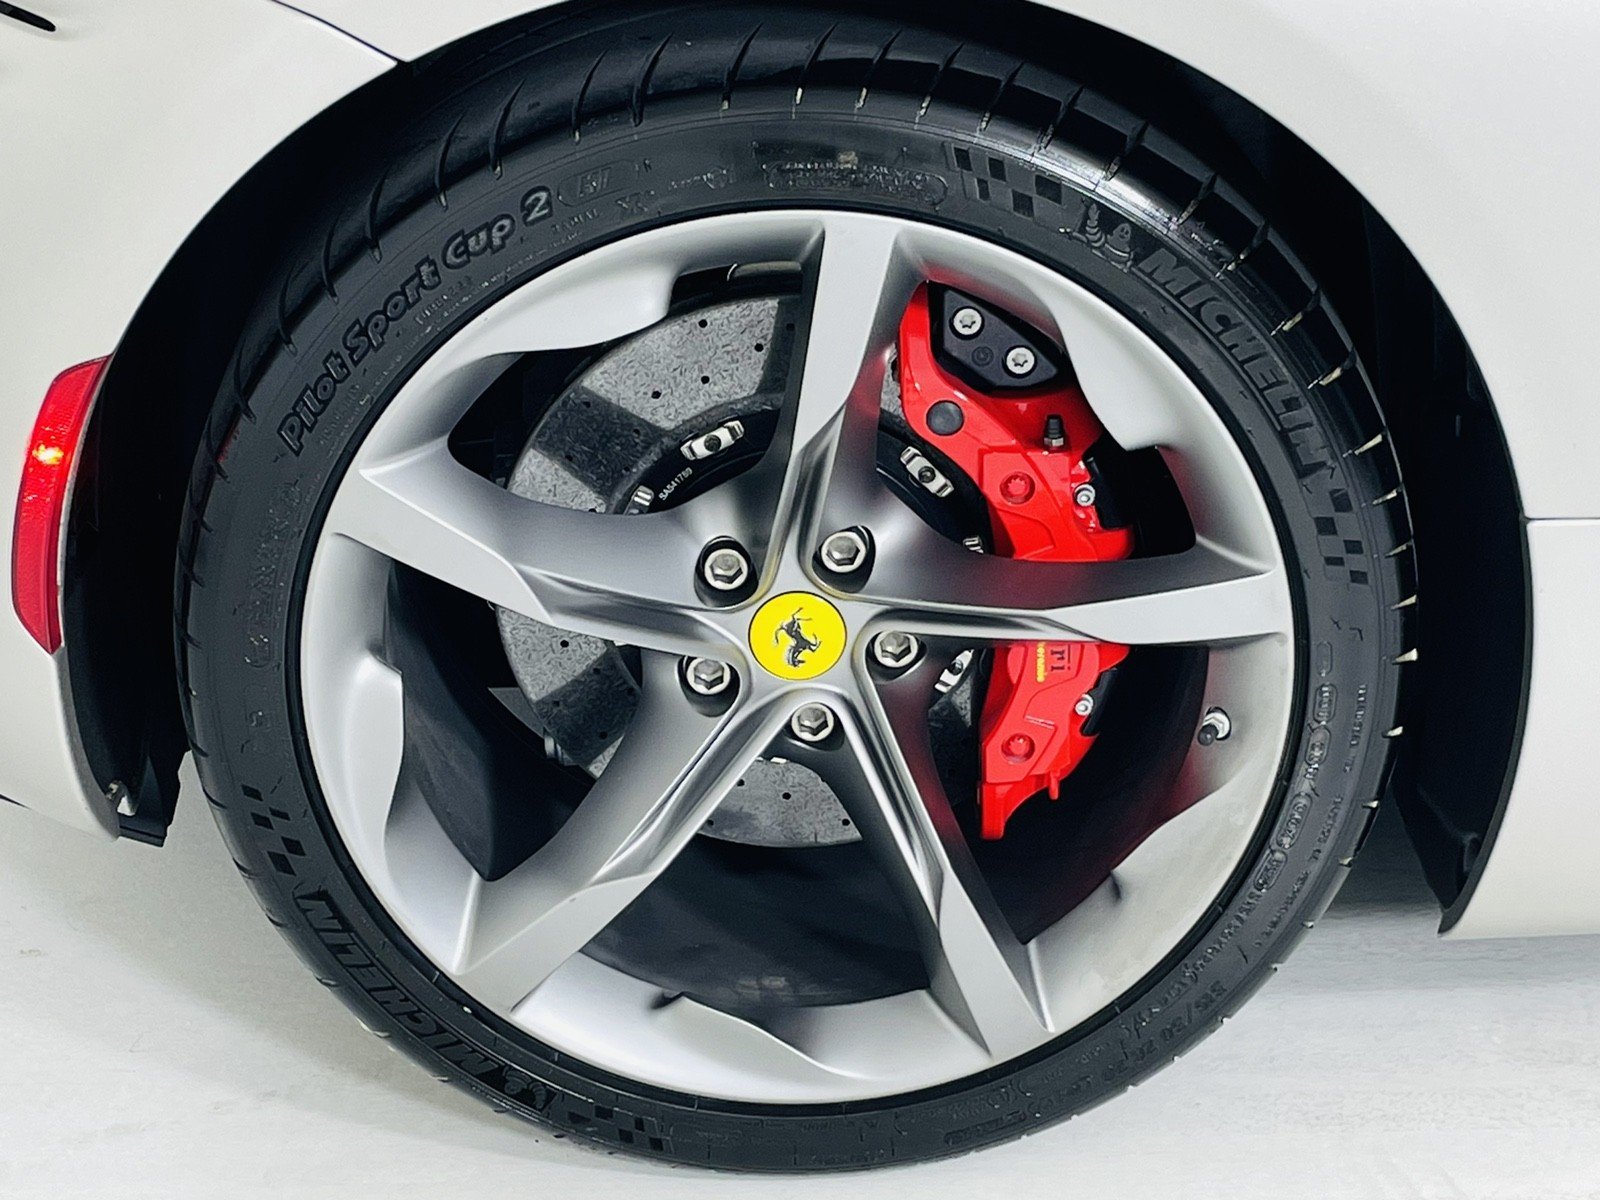 USED 2021 FERRARI SF90 STRADALE COUPE W A 650K MSRP FOR SALE (3)